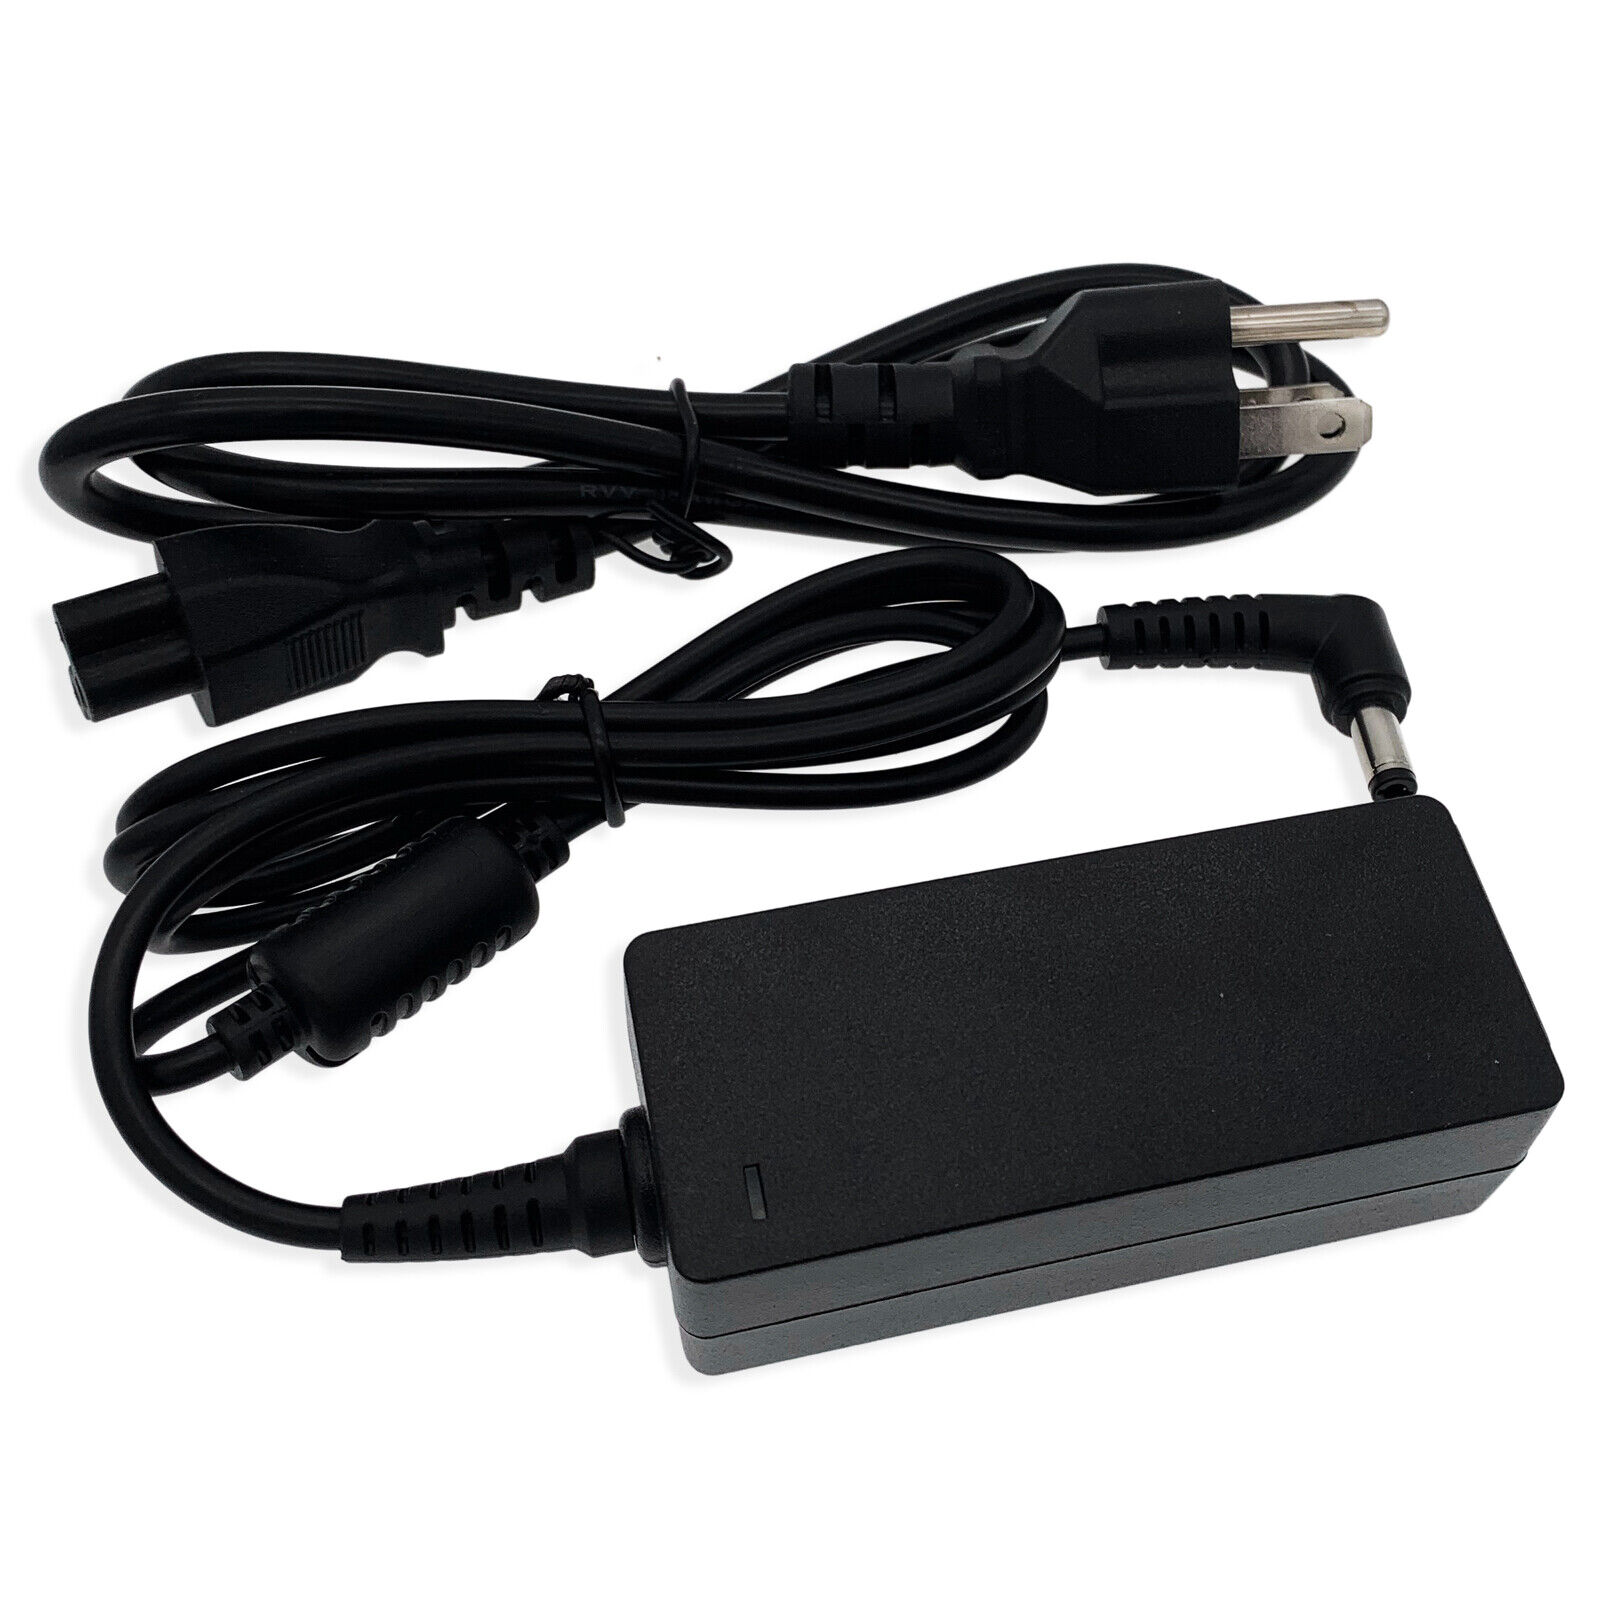 *Brand NEW*F10652A 700-0108-001 NU60-9240230-I3 + Euro Plug Adapter 24V AC Adapter Compatible with Harman Kard